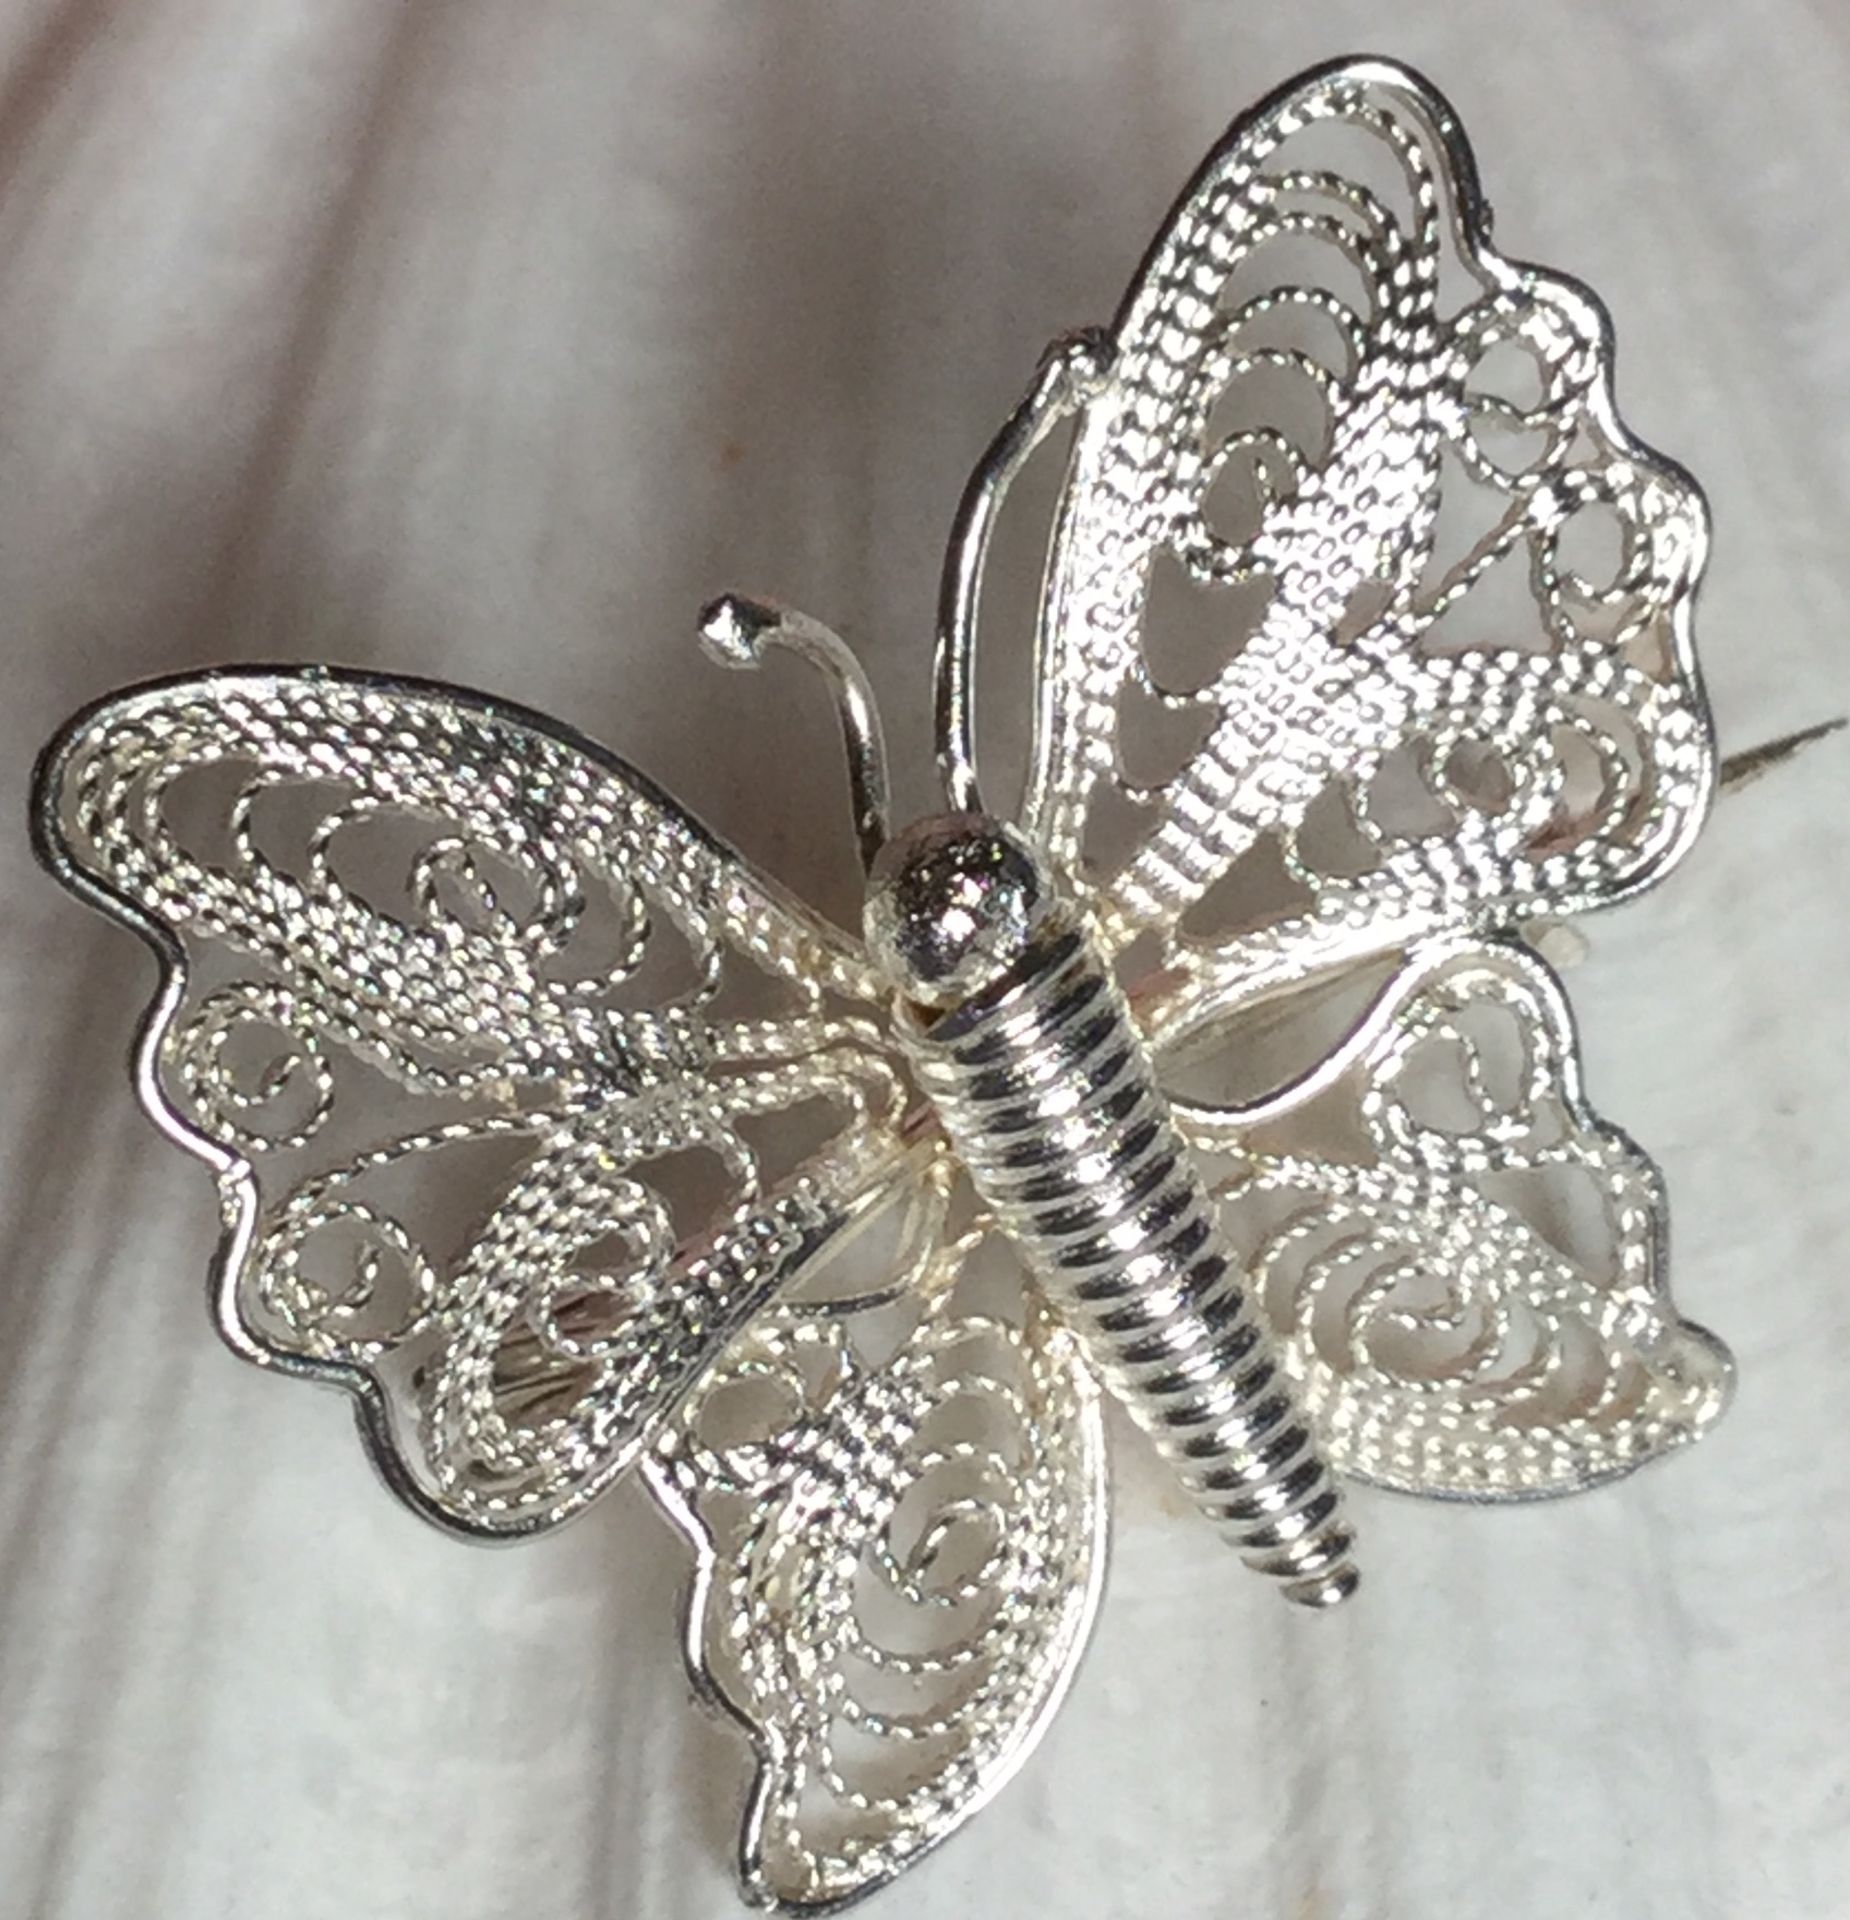 Vintage Silver Butterfly brooch Maltese fine filigree detail exquisite - Image 4 of 4